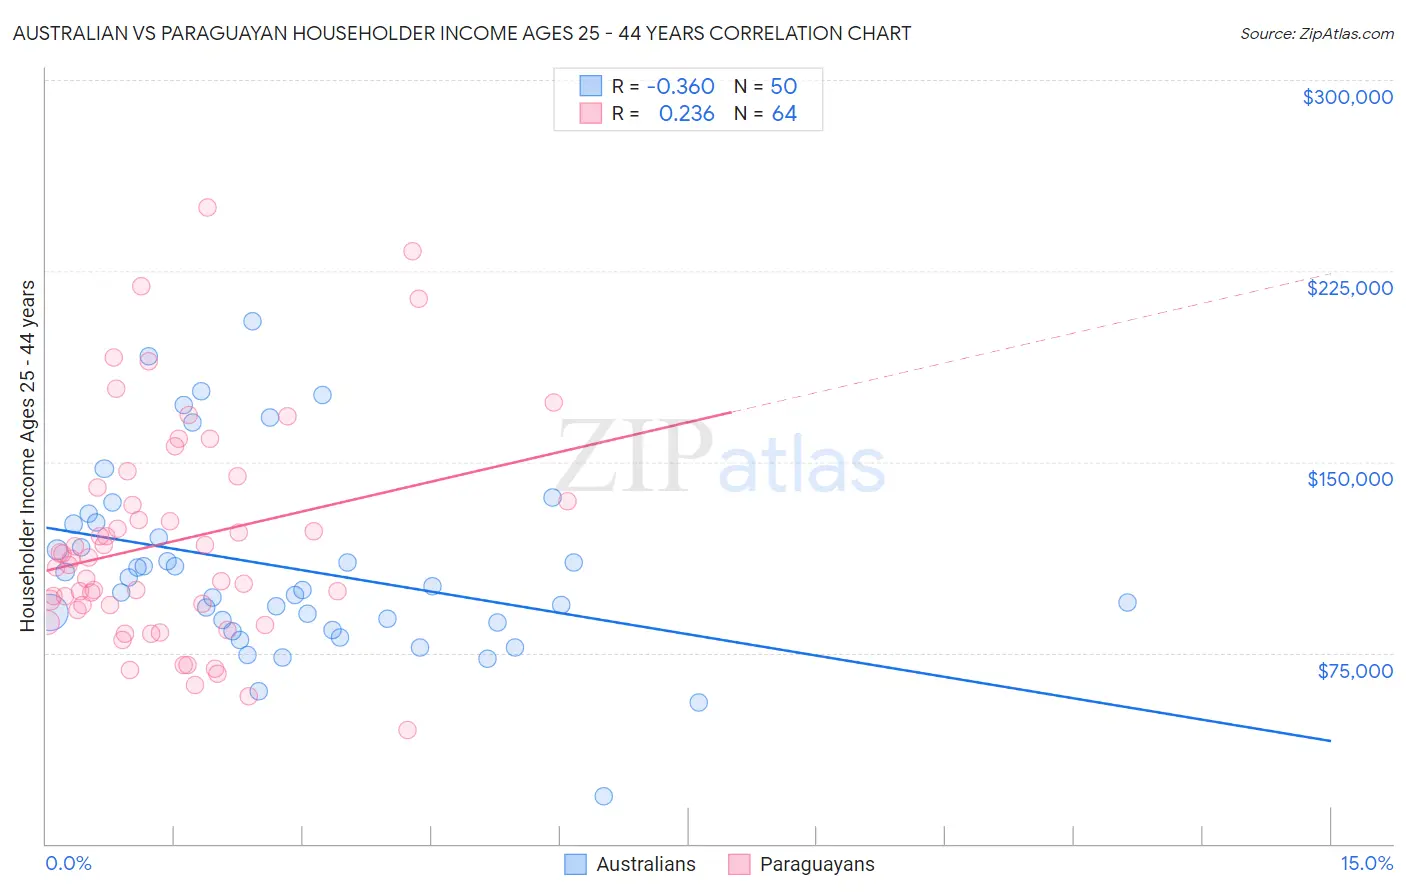 Australian vs Paraguayan Householder Income Ages 25 - 44 years